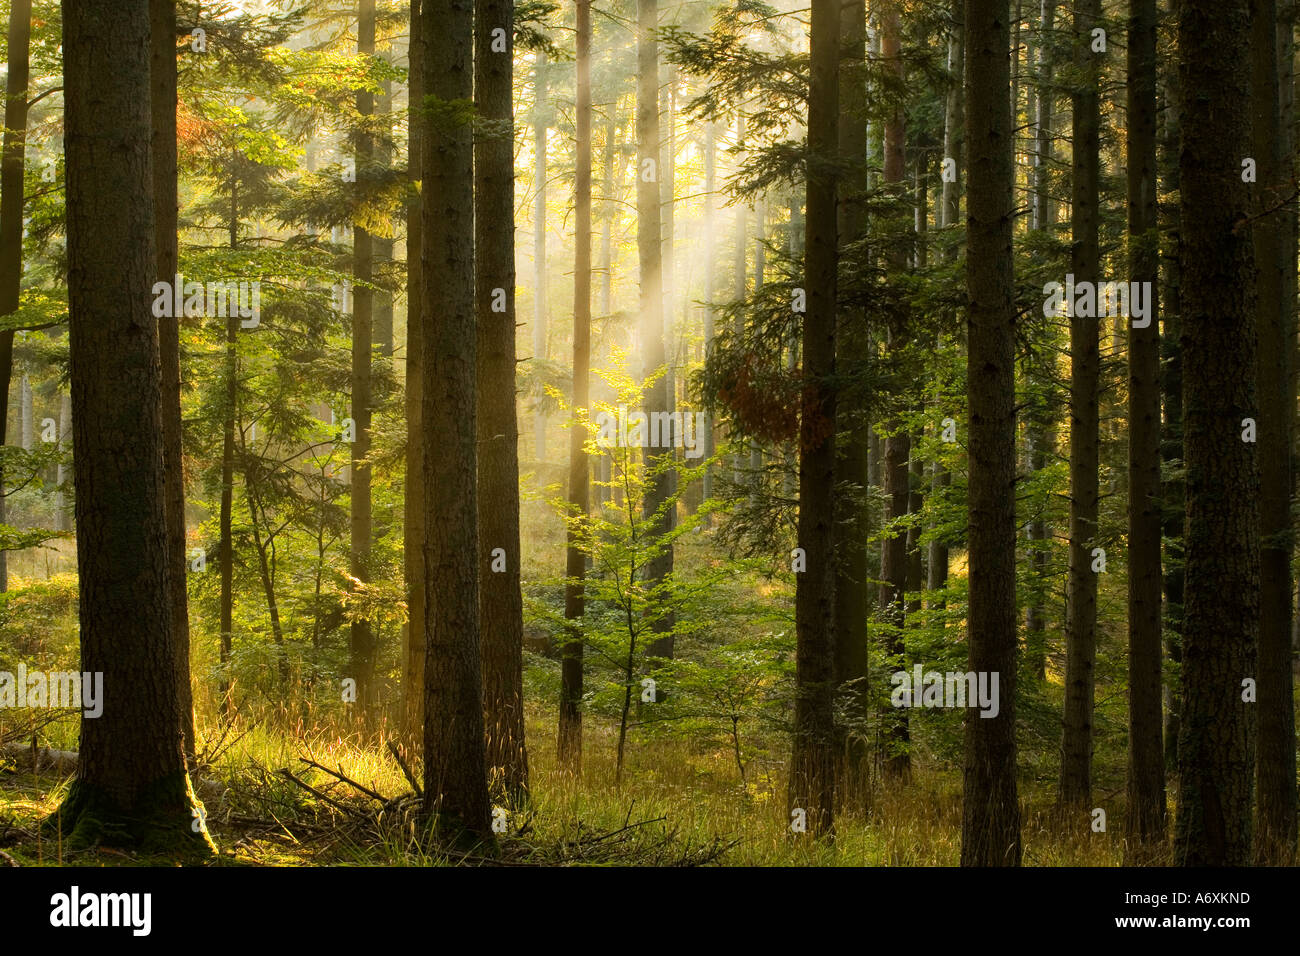 UK Hampshire New Forest Beams of sunlight filtering through forest Stock Photo